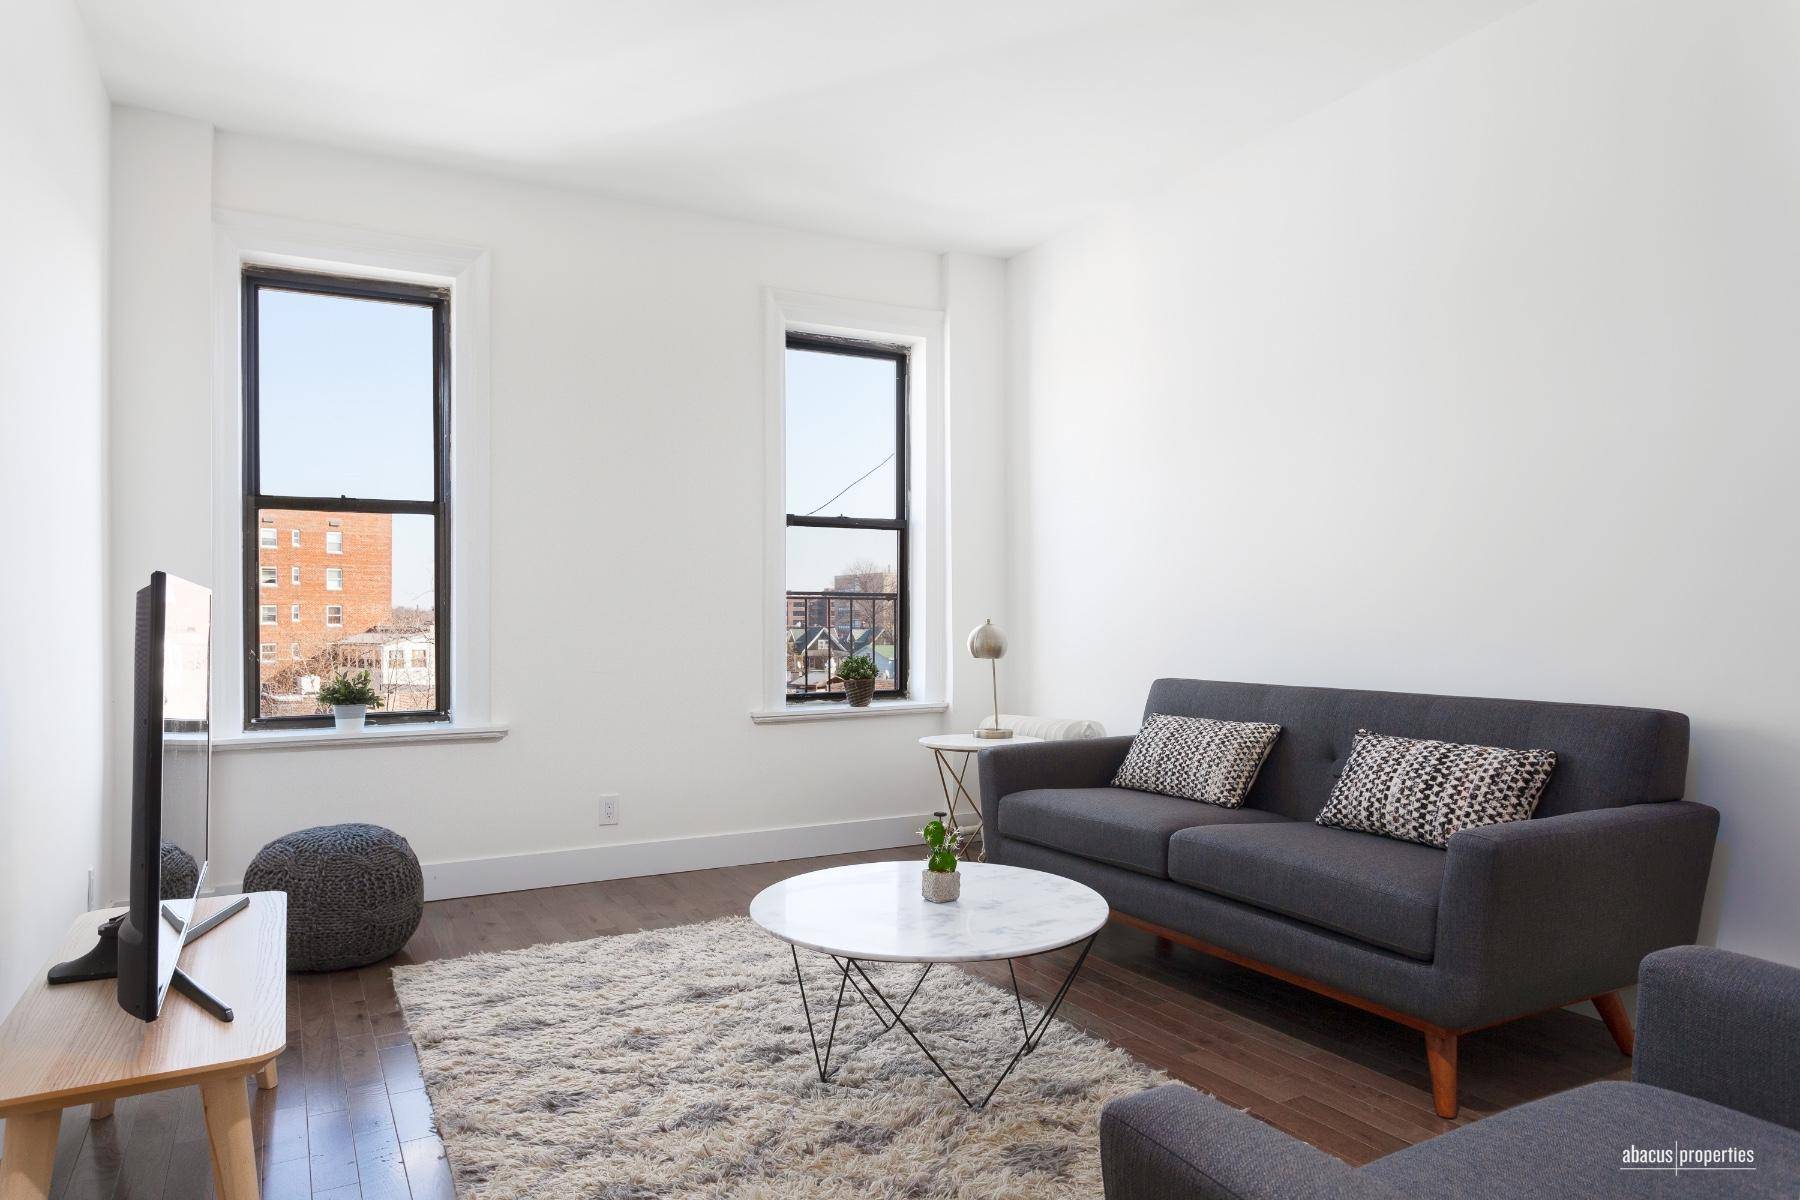 If you appreciate generous sunlight and city views then this apartment is for you !